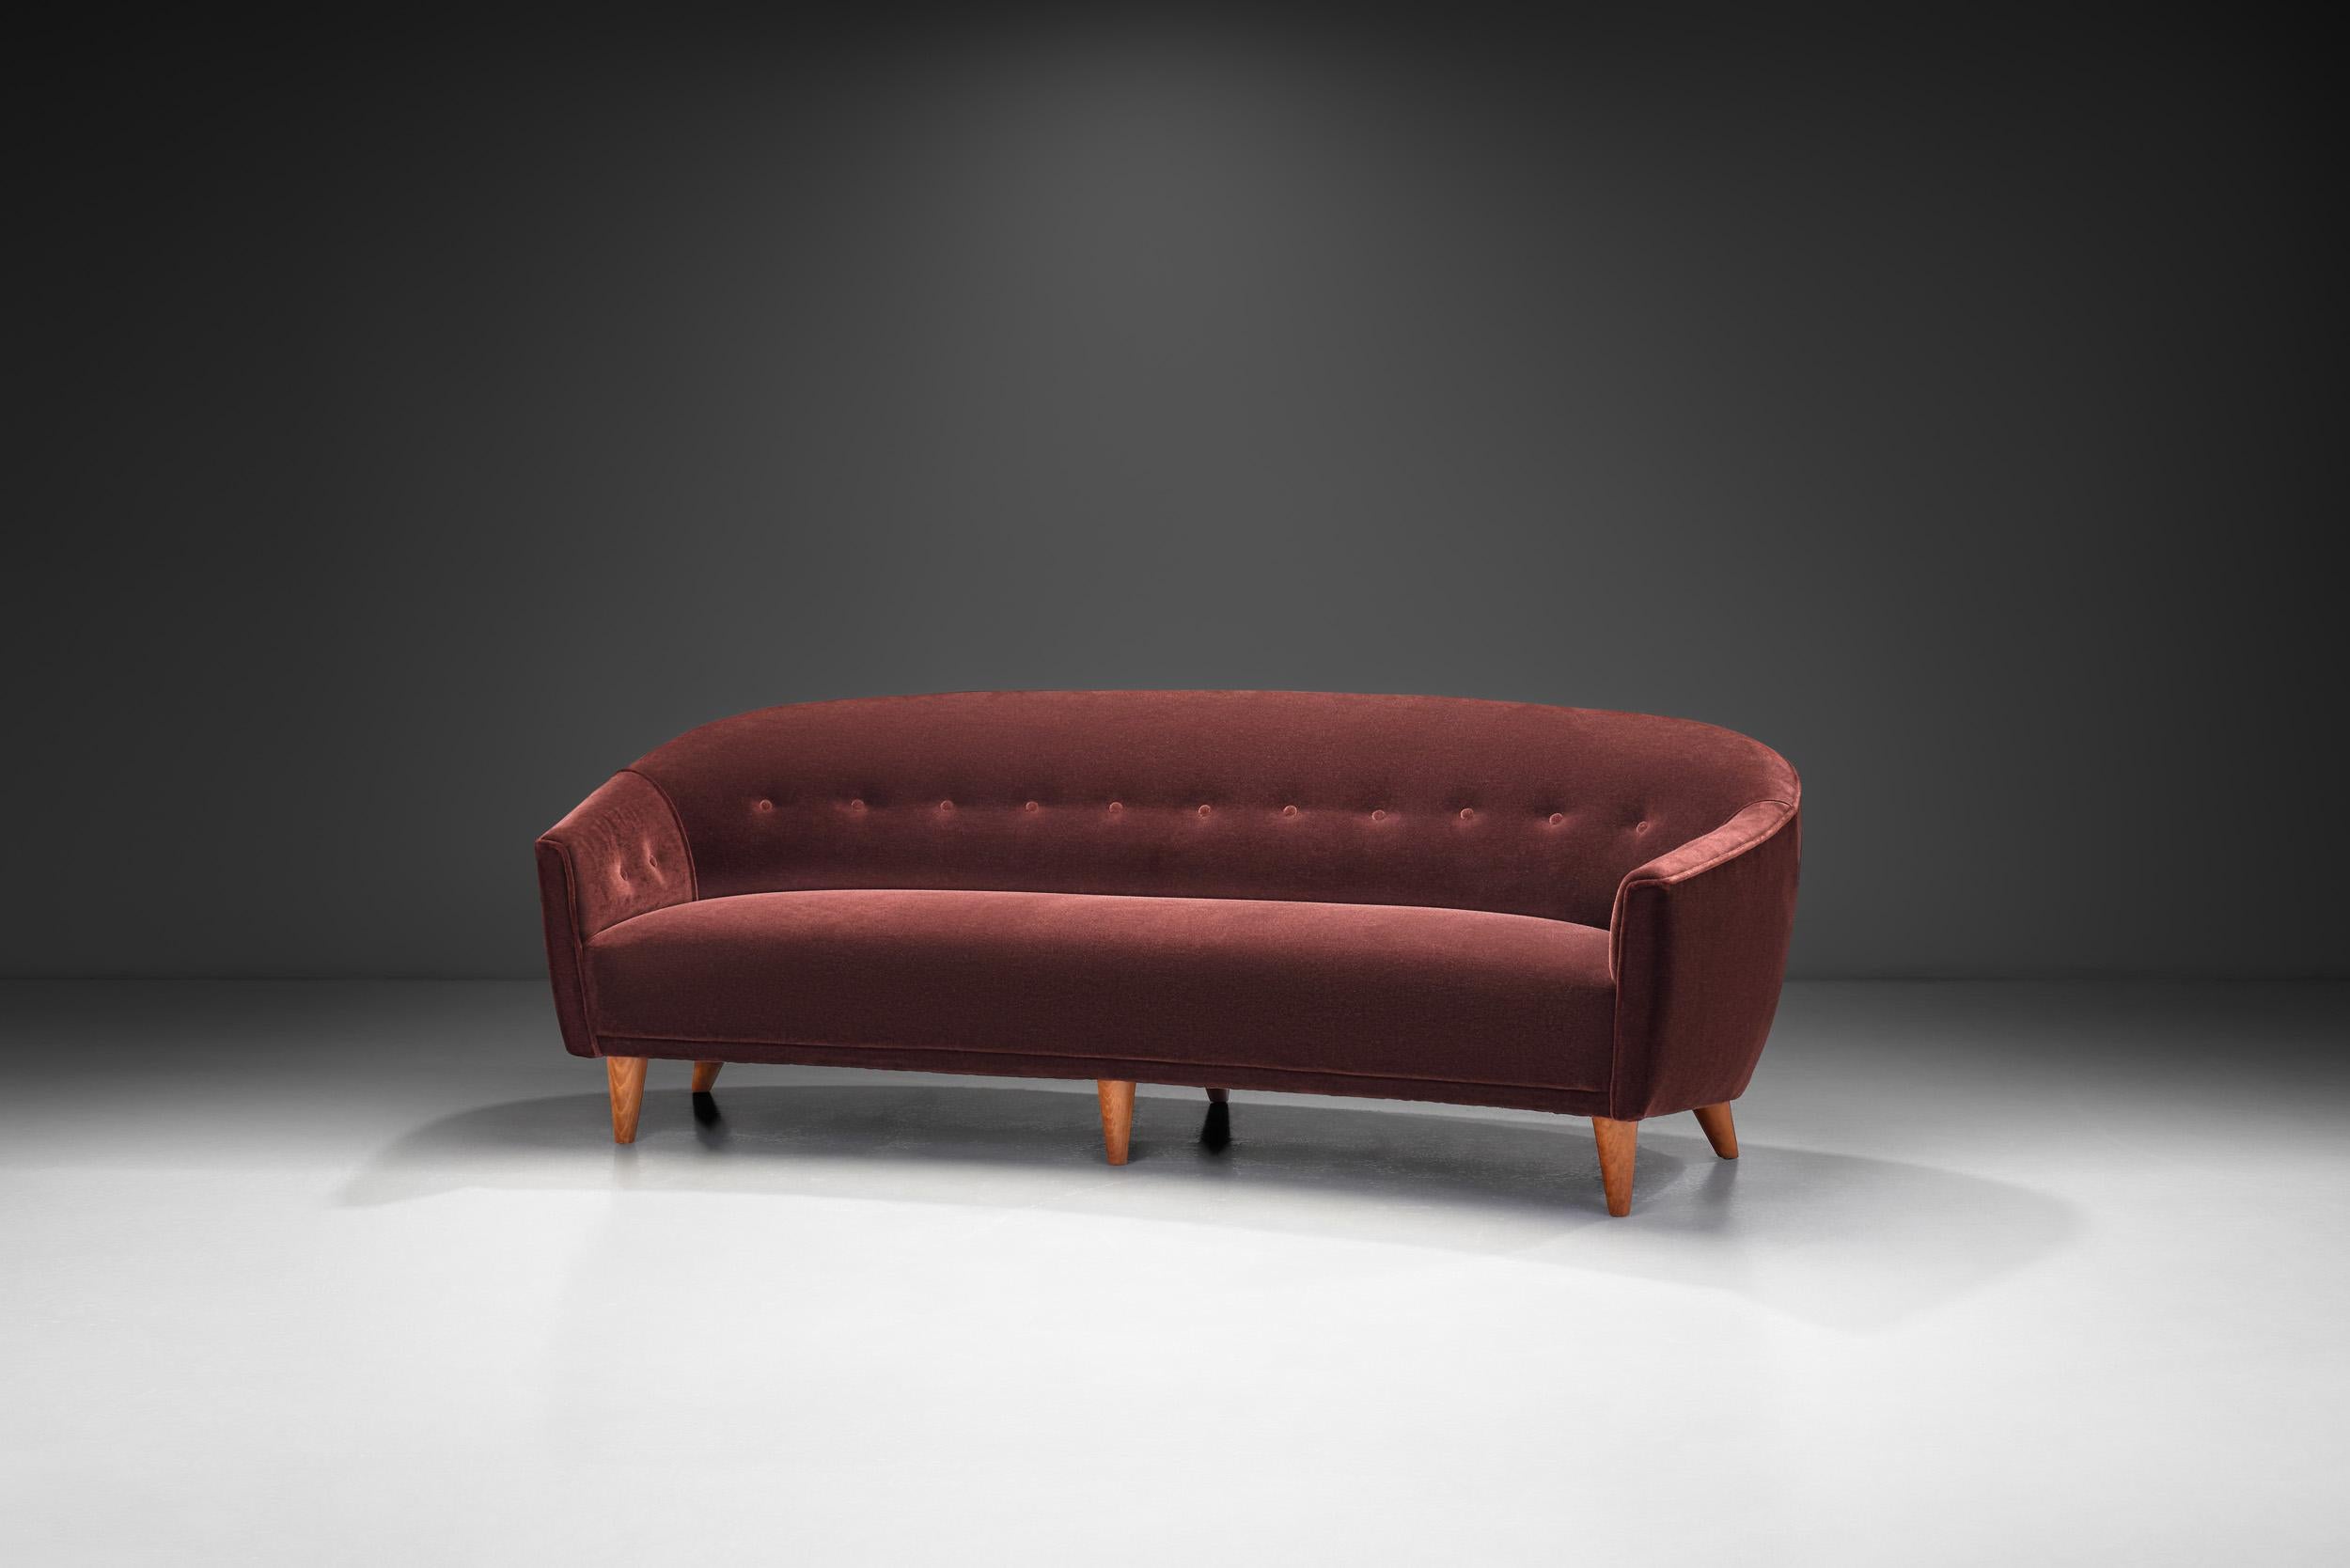 This three-seater mid-century modern sofa is a timeless statement piece. In the world of interior design, few furniture pieces captivate the imagination quite like the mid-century modern sofa. This particular sofa, with its distinctive light banana